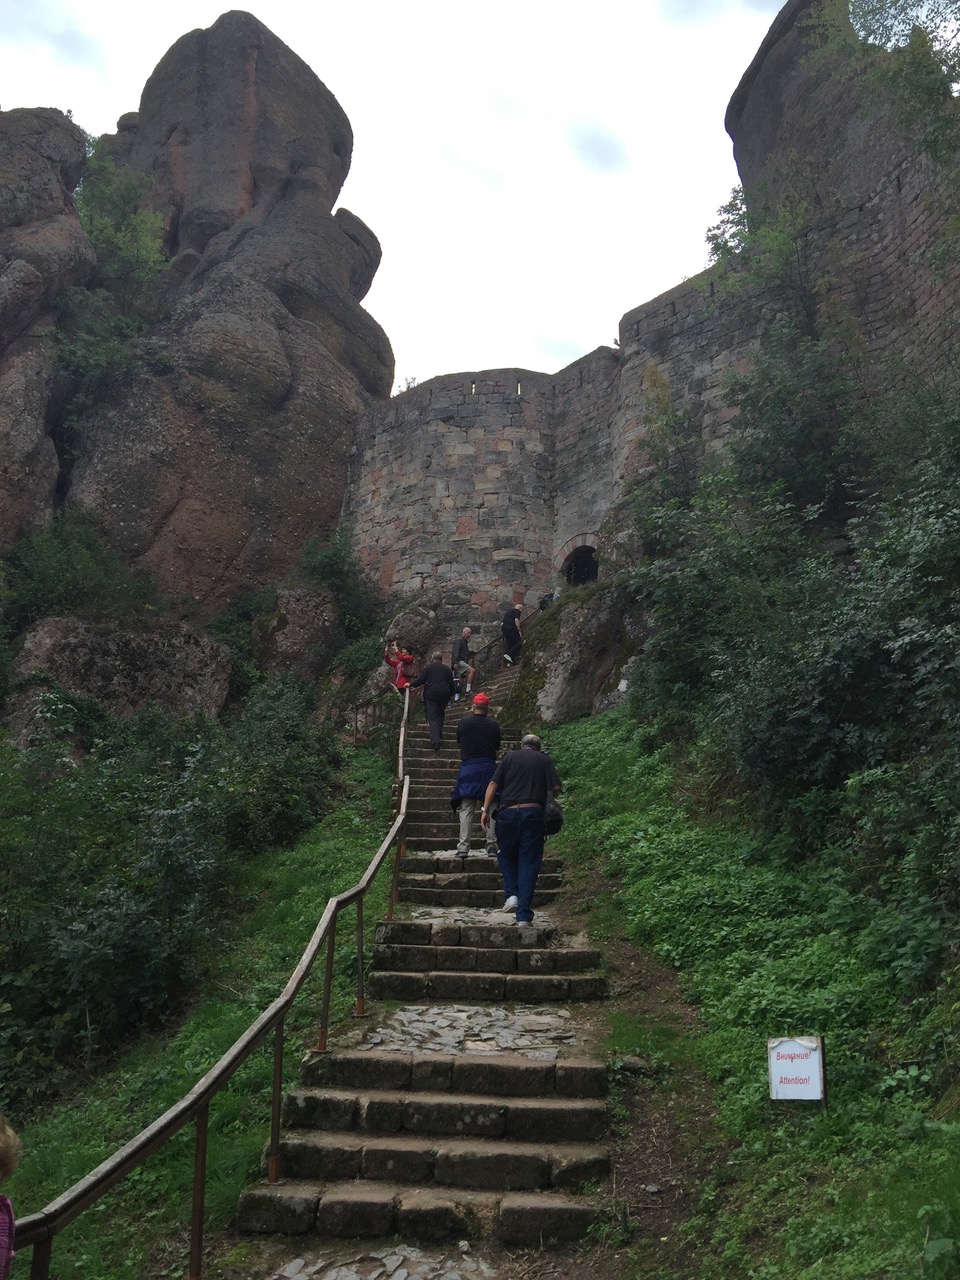 Climbing a set of stairs to the highest point of the fortress tucked between the rocks